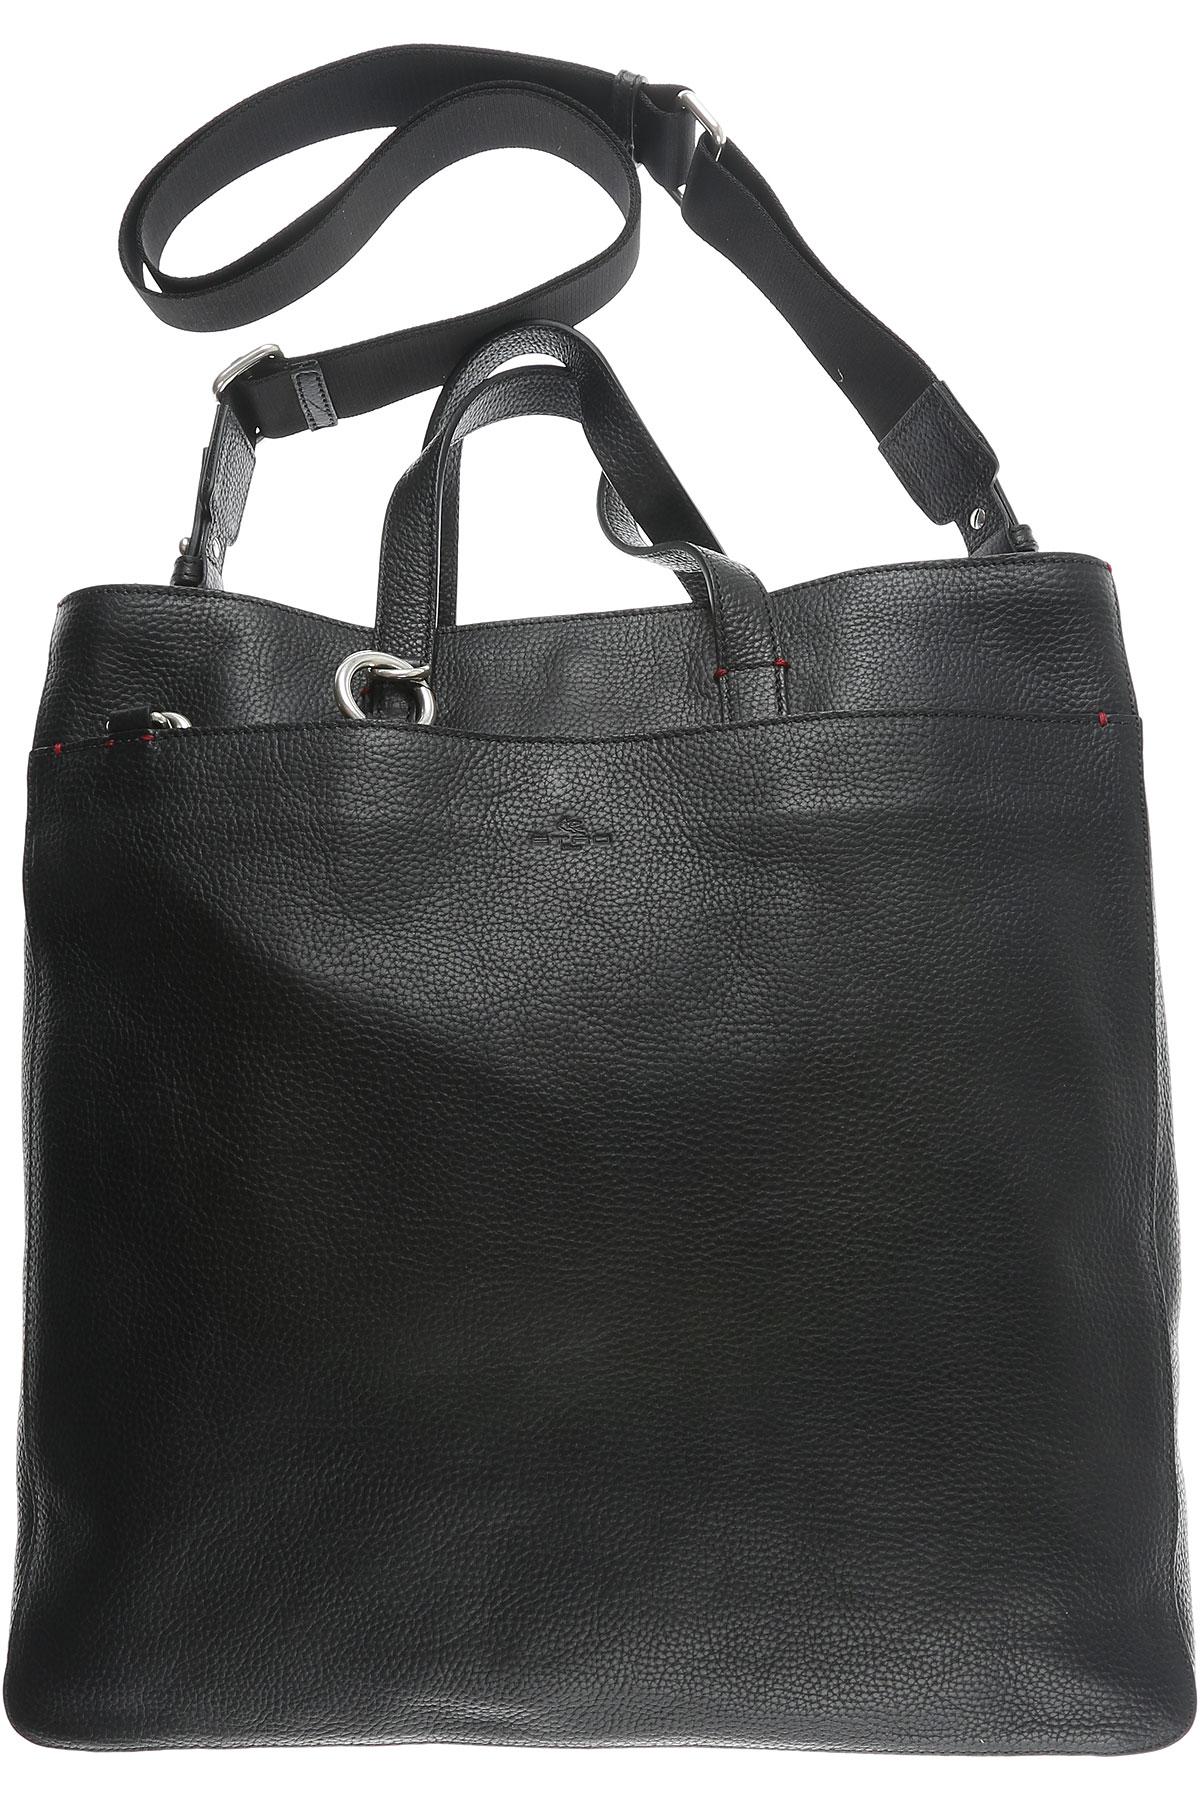 Lyst - Etro Totes in Black for Men - Save 22%